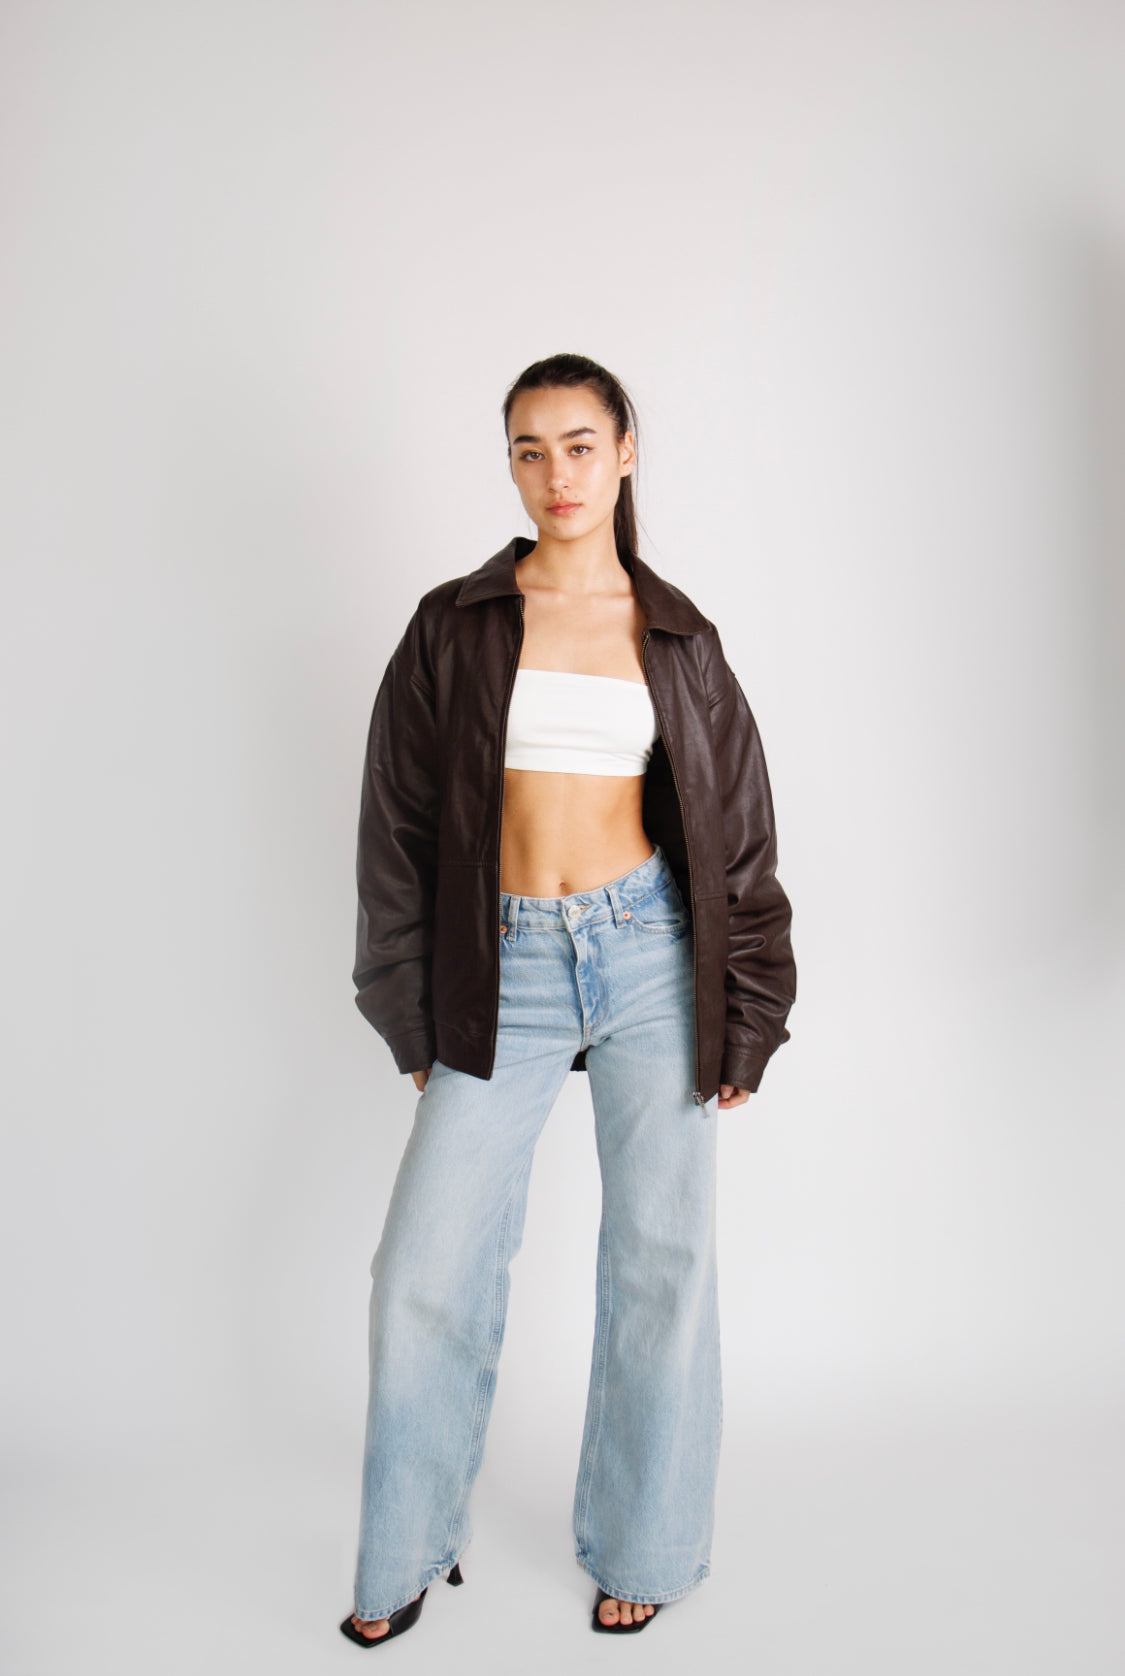 Reiss 90’s Oversized Brown Leather Jacket – In My Element